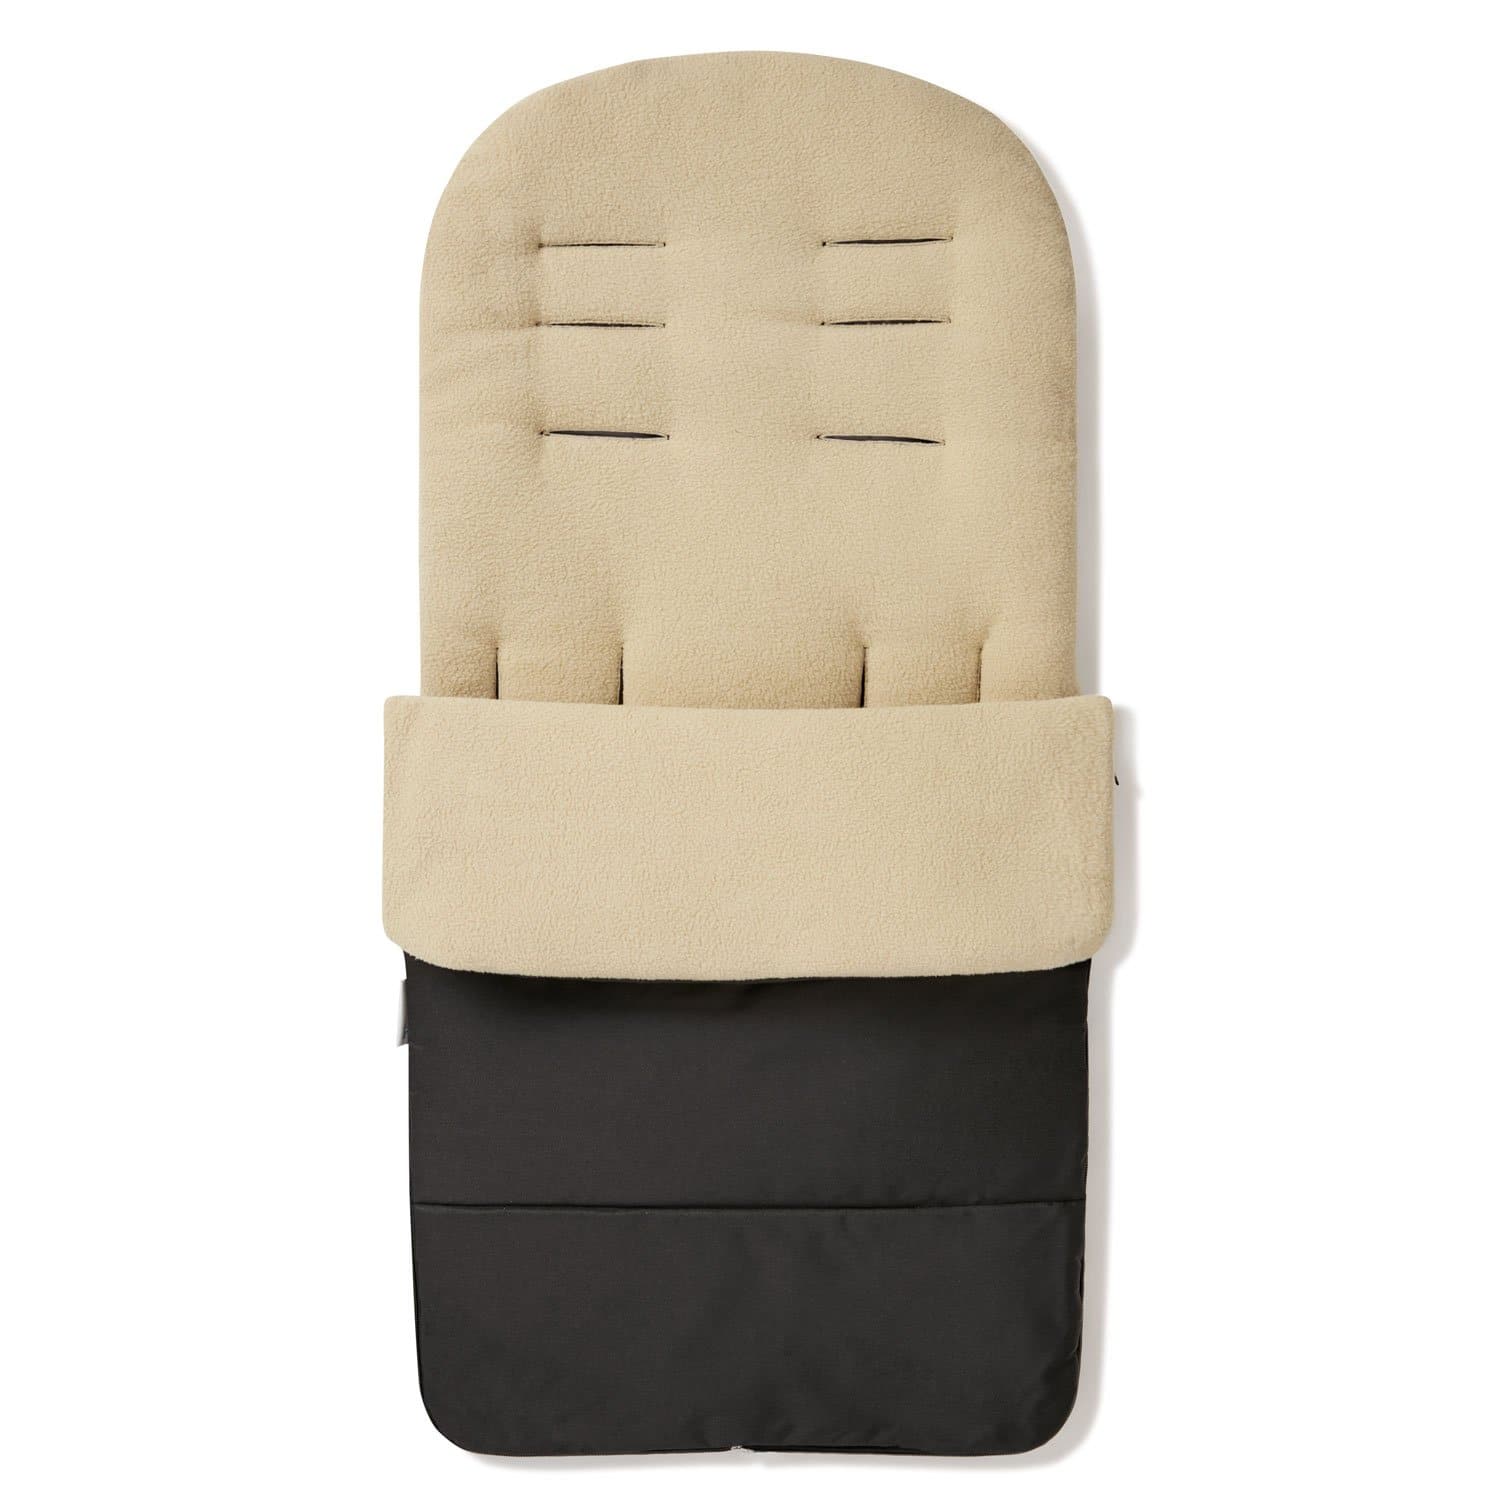 Premium Footmuff / Cosy Toes Compatible with Kiddicouture - Desert Sand / Fits All Models | For Your Little One